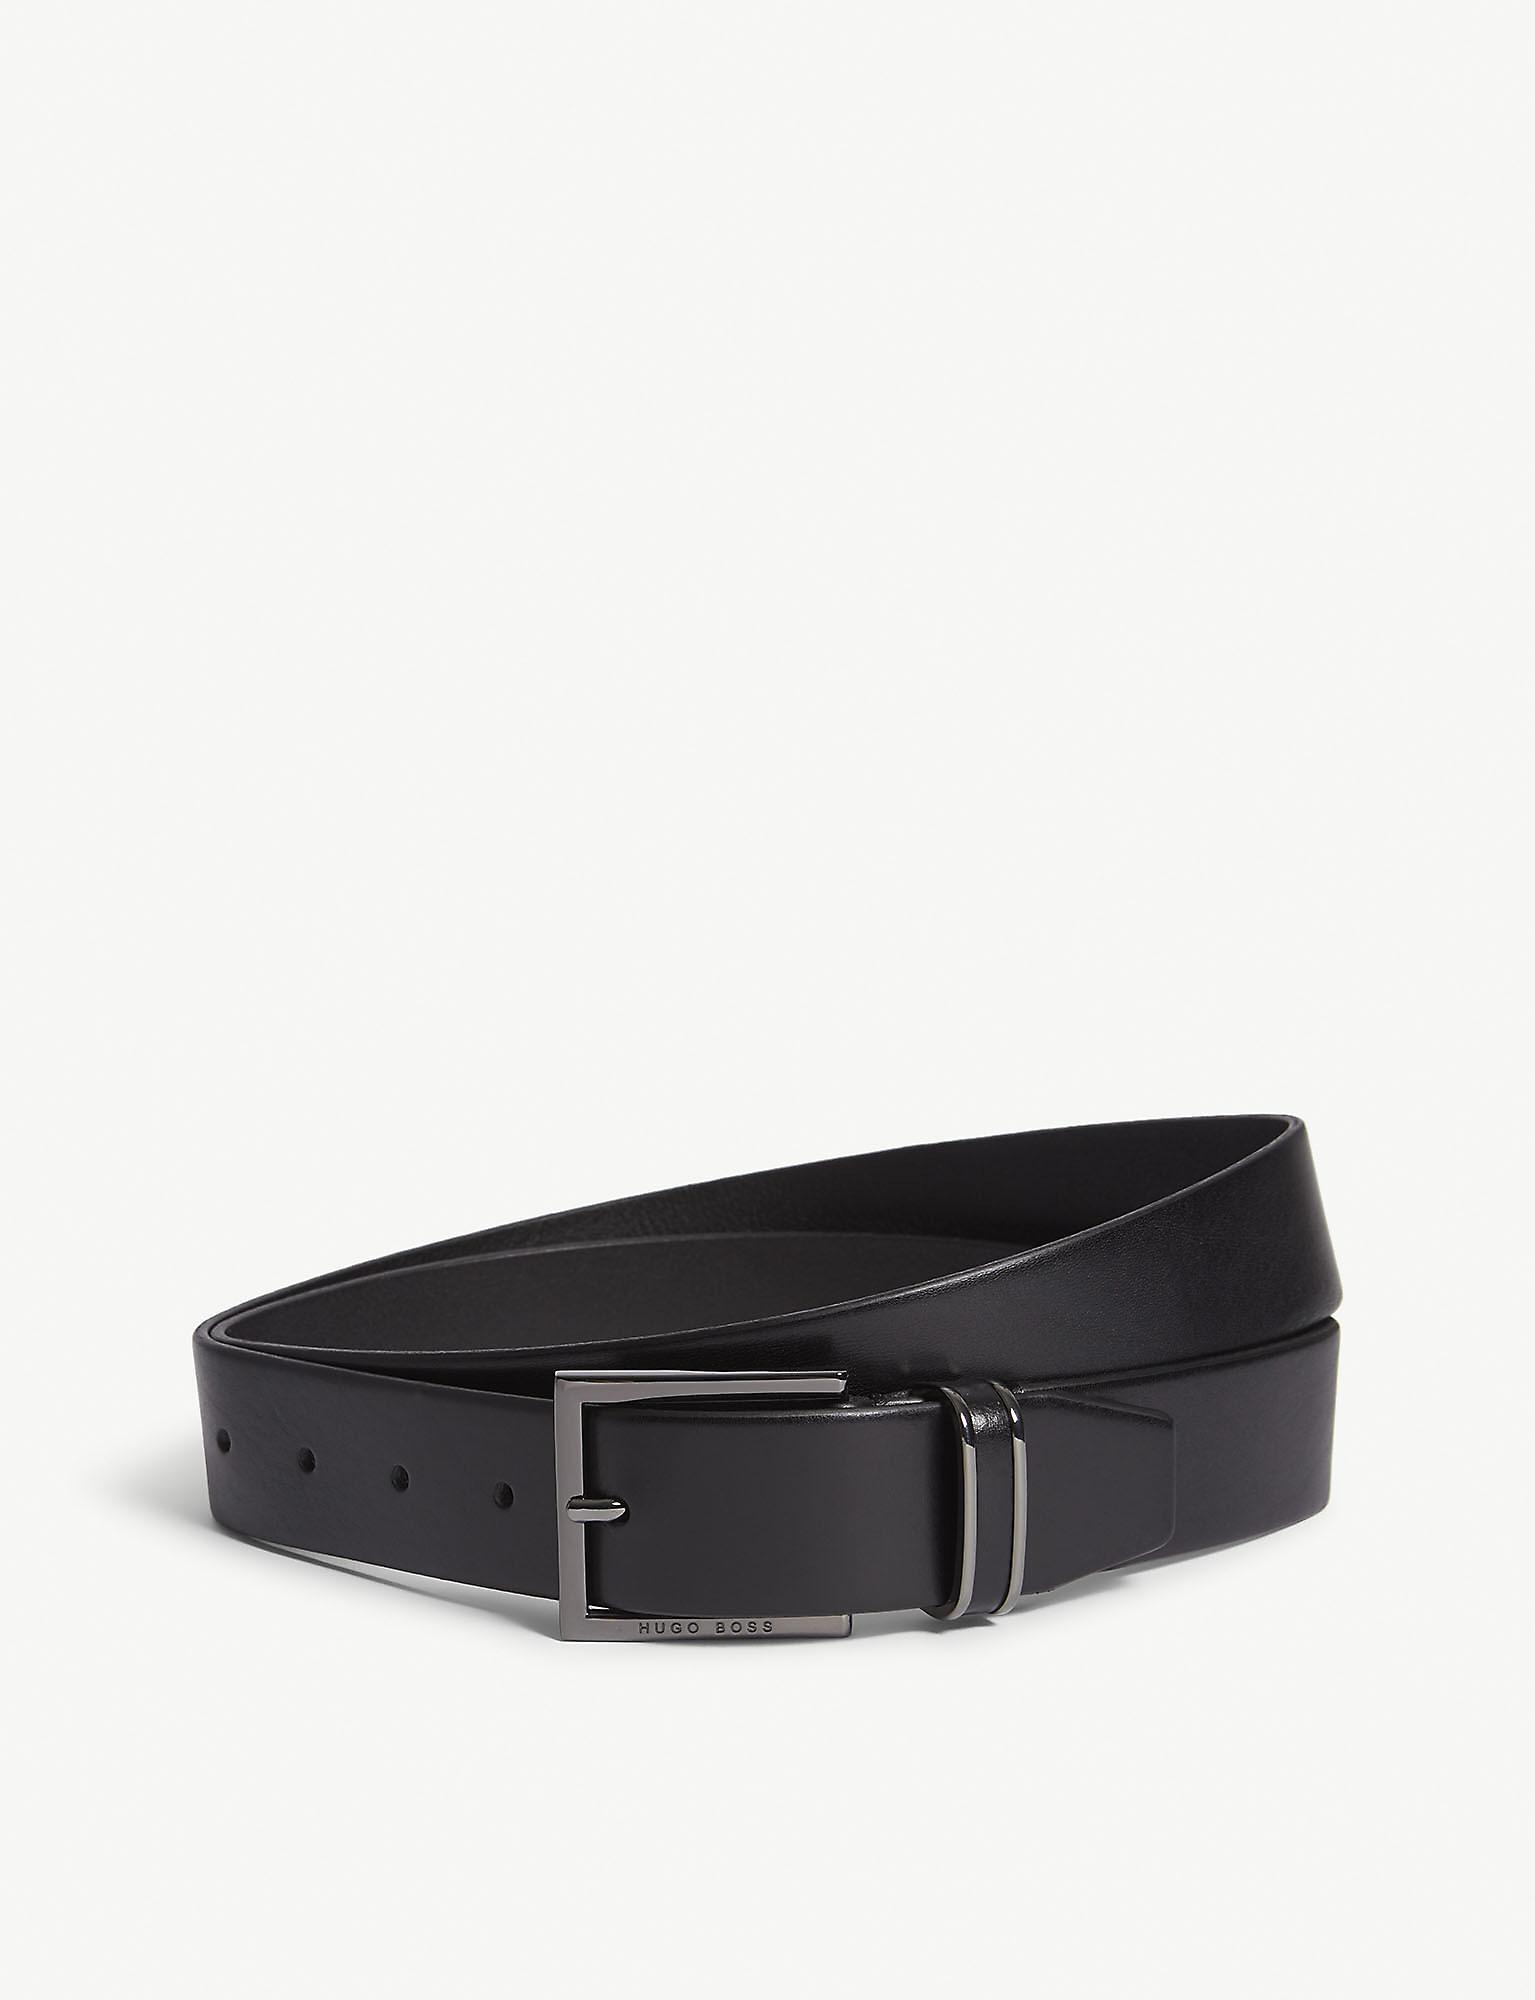 BOSS by Hugo Boss Canzion Smooth Leather Belt in Black for Men - Lyst